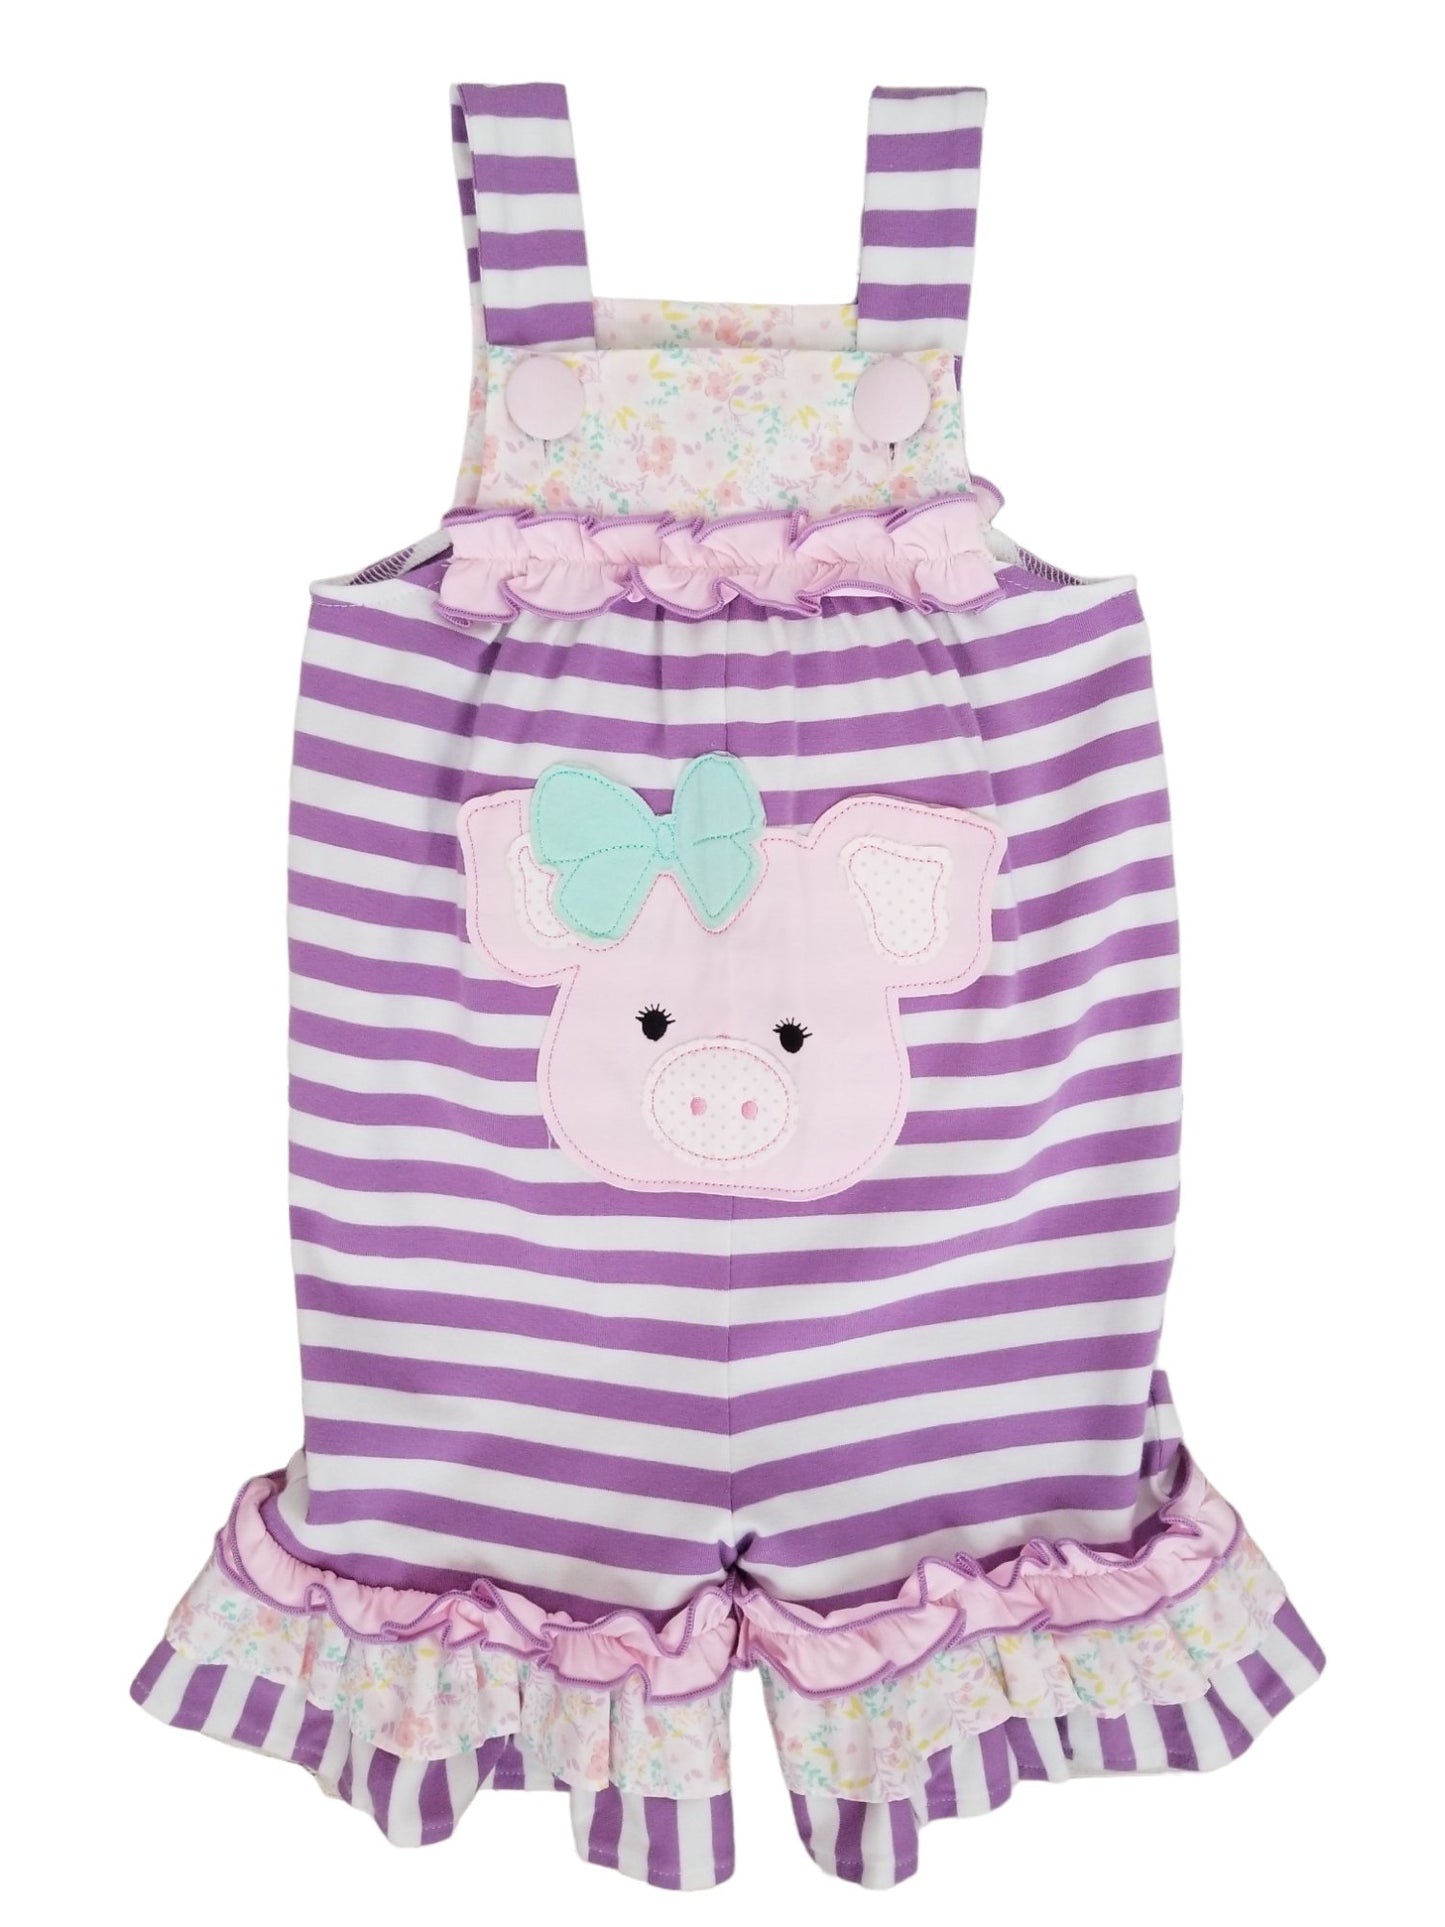 Millie Jay Pearl the Pig Jay Romper